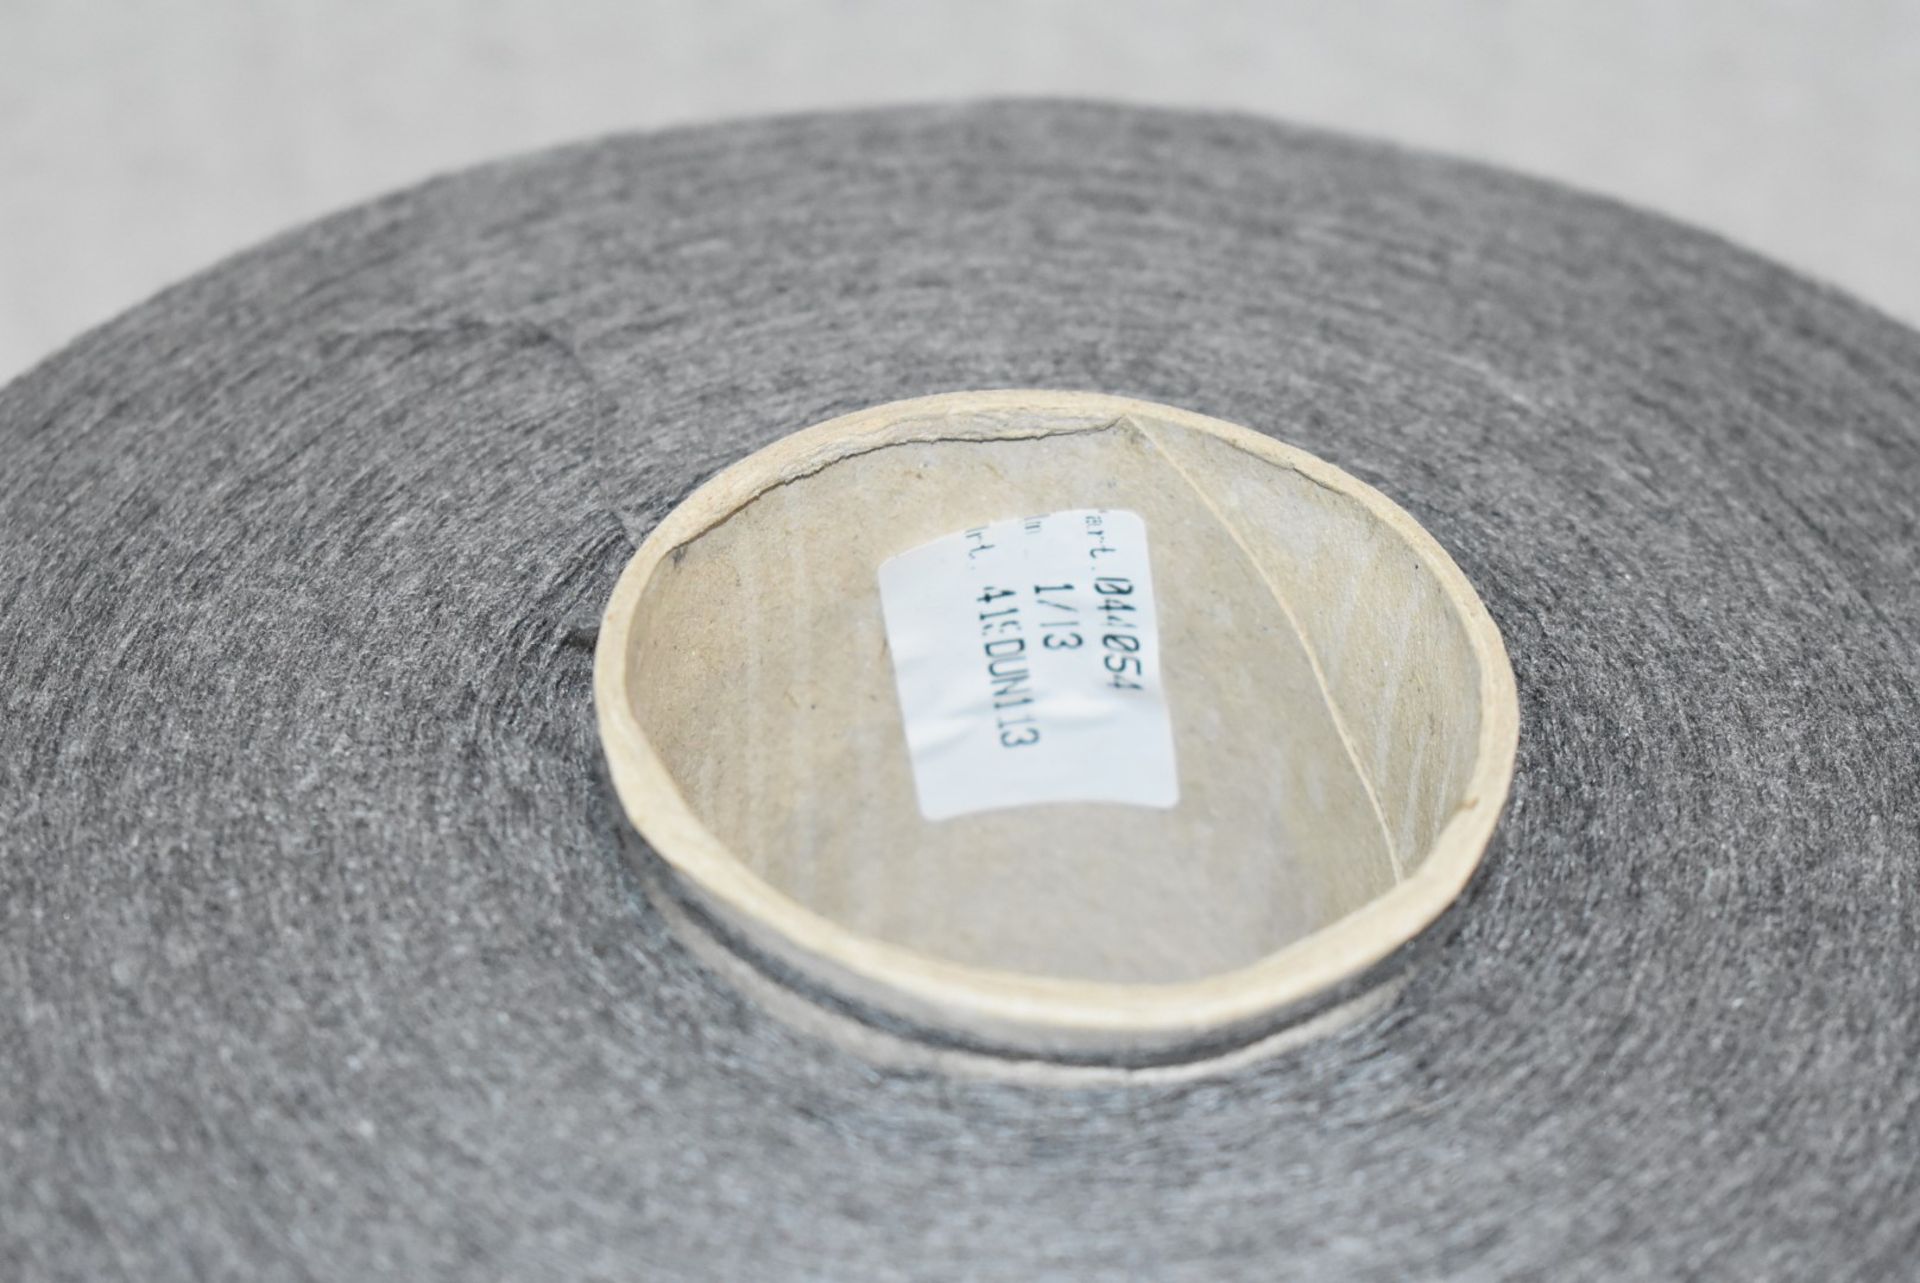 1 x Cone of 1/13 MicroCotton Knitting Yarn - Mid Grey - Approx Weight: 2,500g - New Stock ABL Yarn - Image 8 of 9